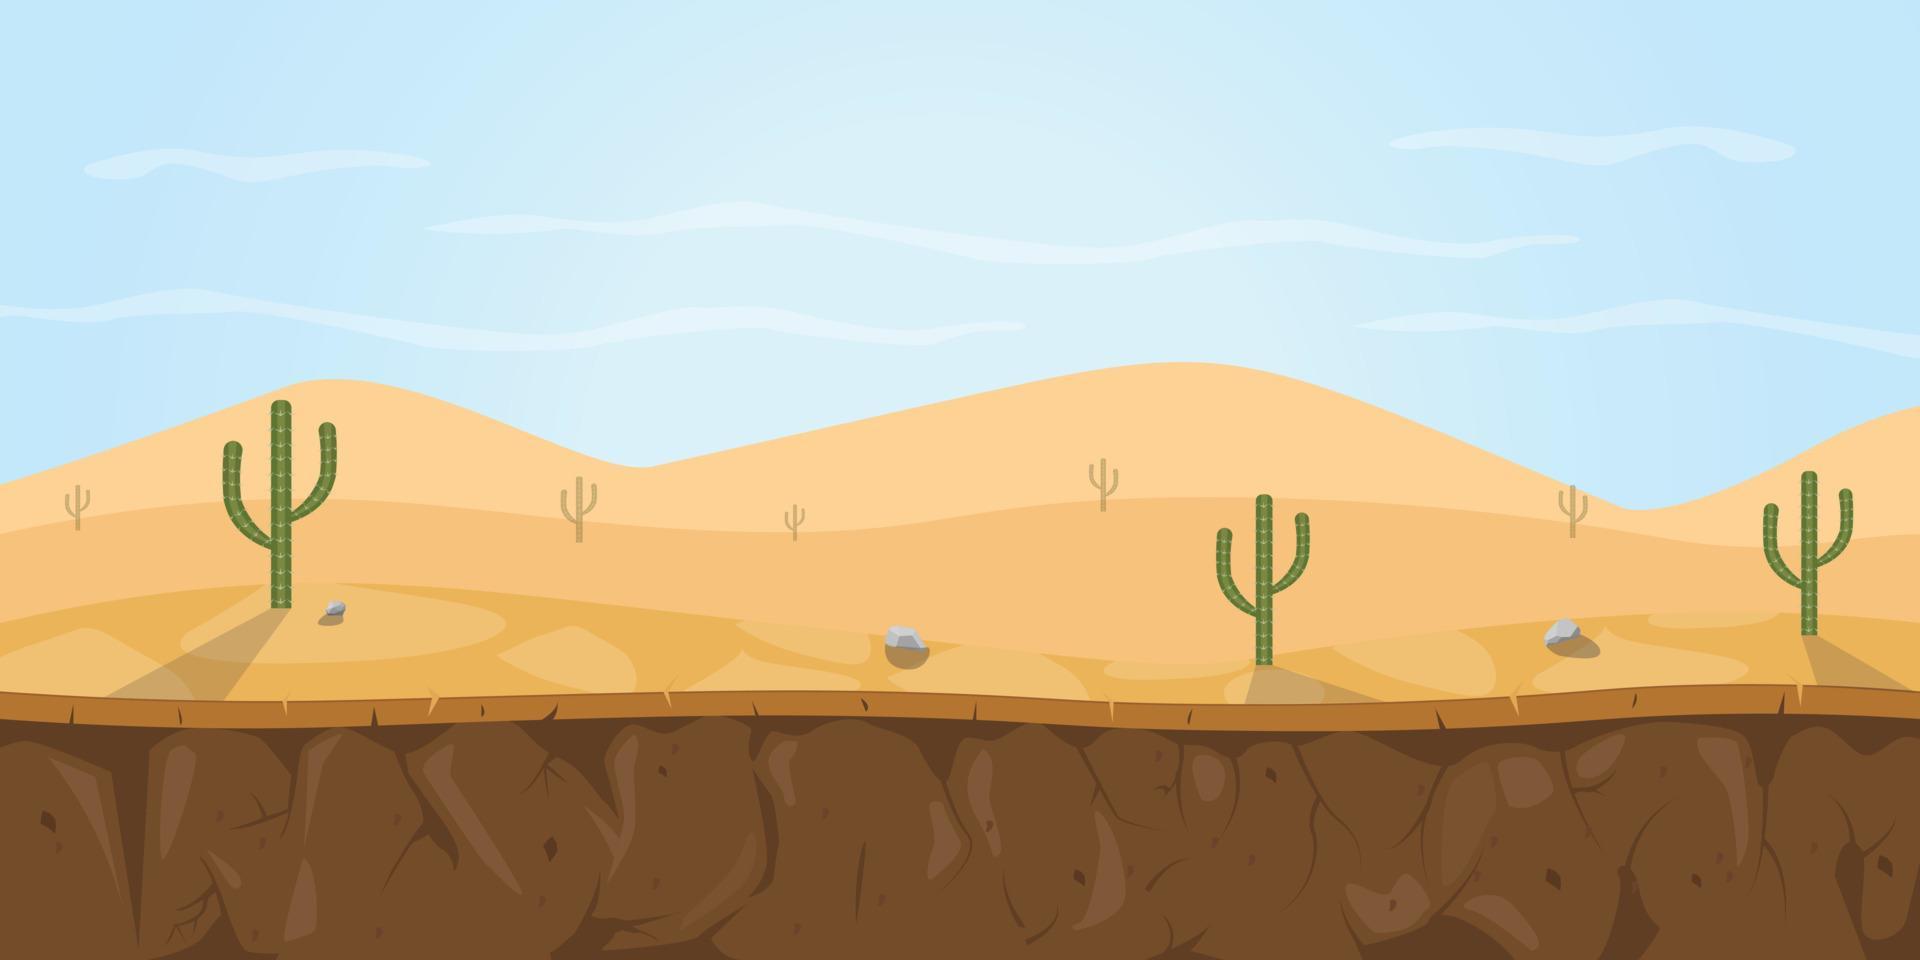 gold mine stone soil layer with cactus on desert area vector graphic illustration